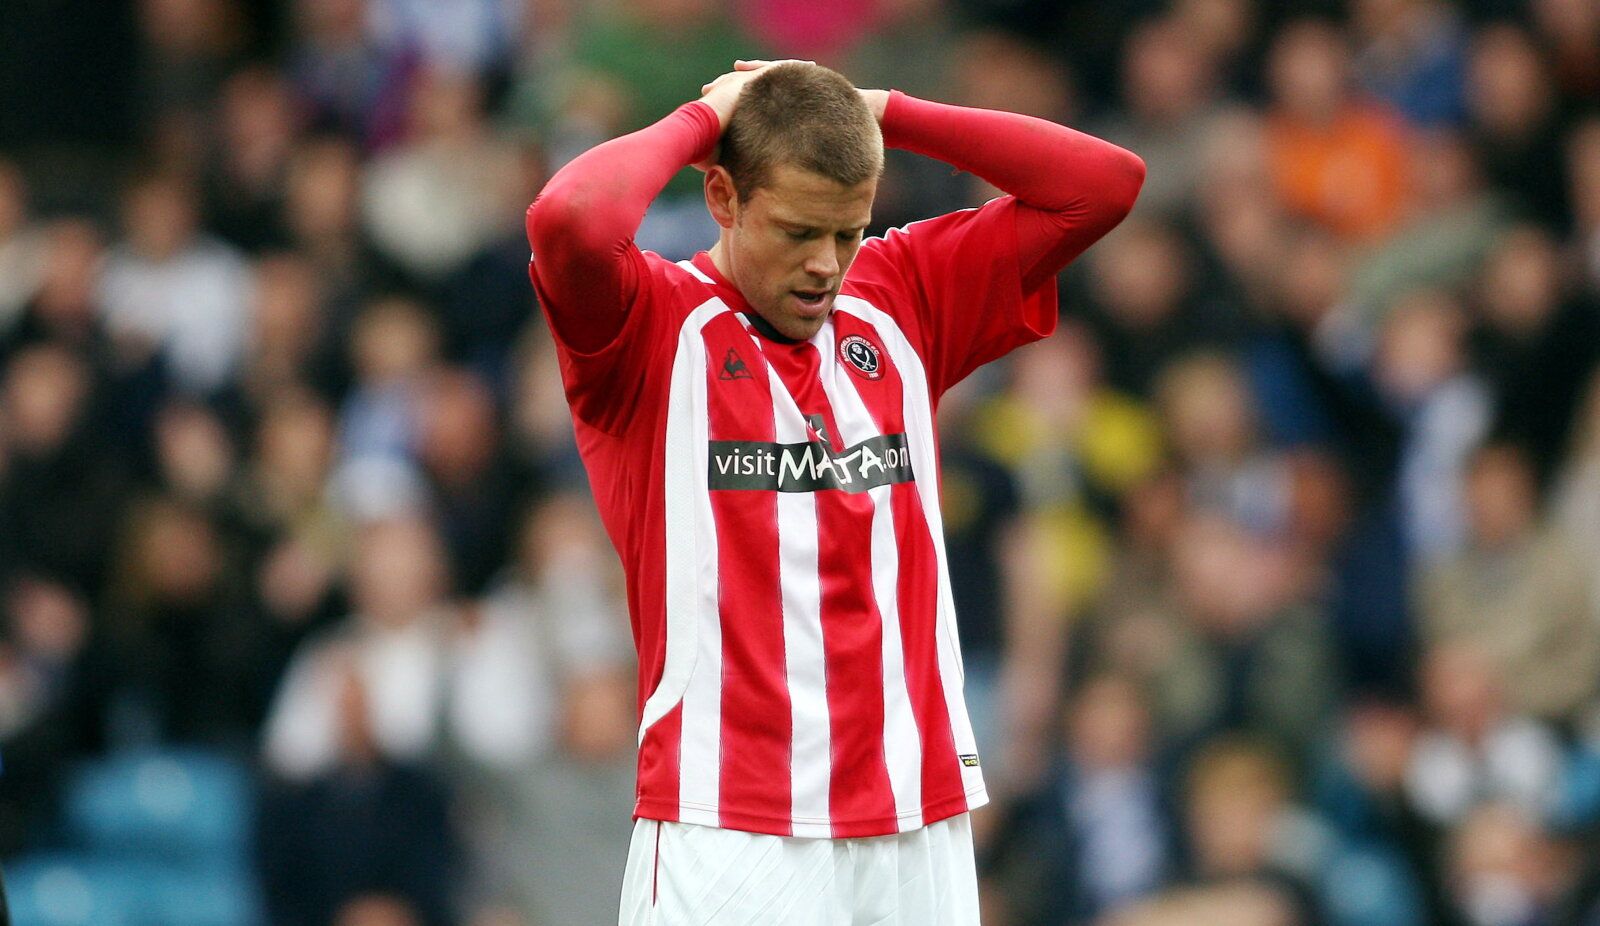 Football - Sheffield Wednesday v Sheffield United Coca-Cola Football League Championship - Hillsborough - 19/10/08 
A dejected looking James Beattie of Sheffield United 
Mandatory Credit: Action Images / Scott Heavey 
Livepic